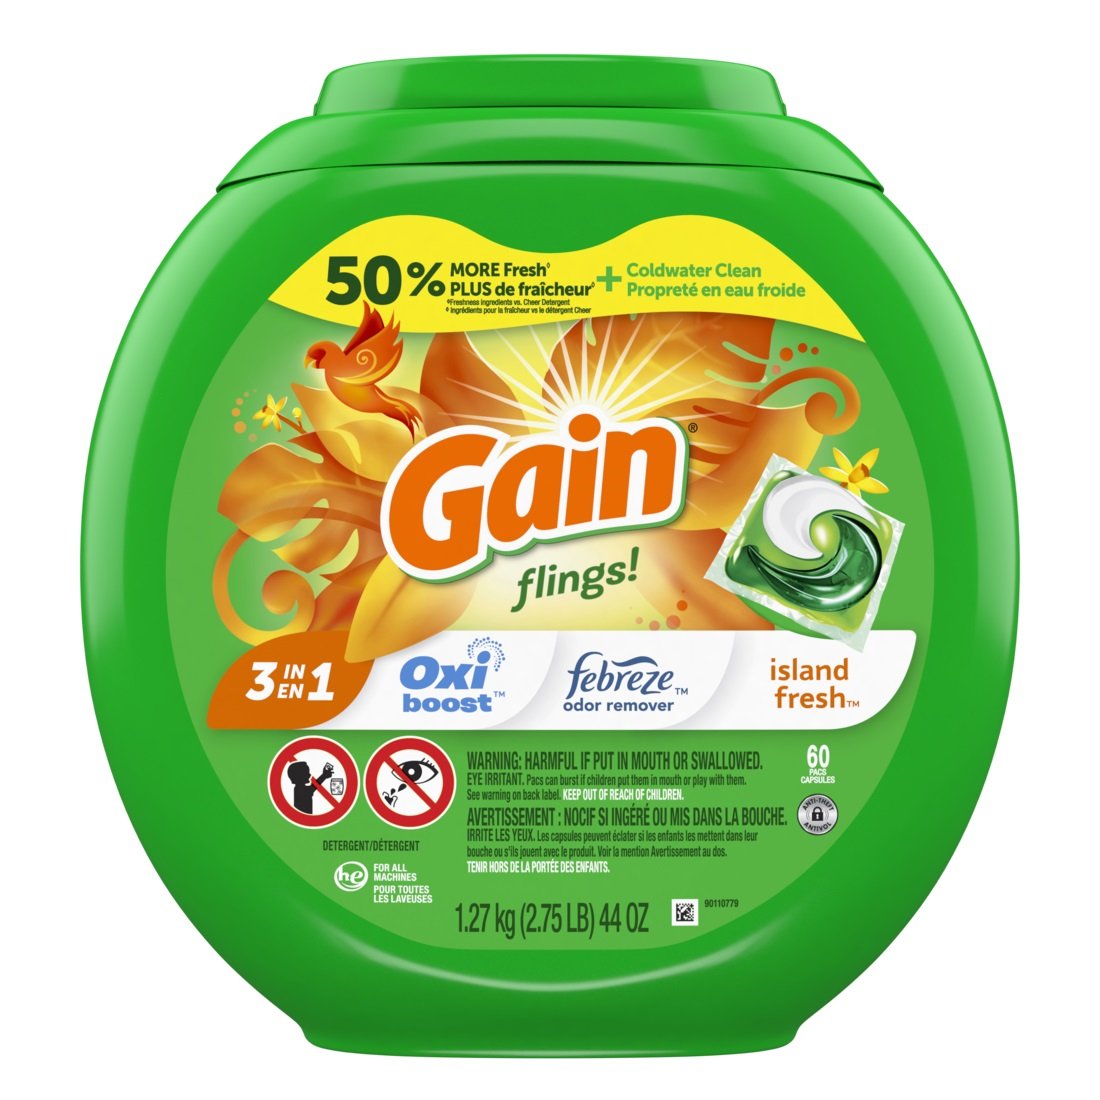 Gain - Flings! Laundry Detergent Pacs 60 Count, Island Fresh - Case of 4